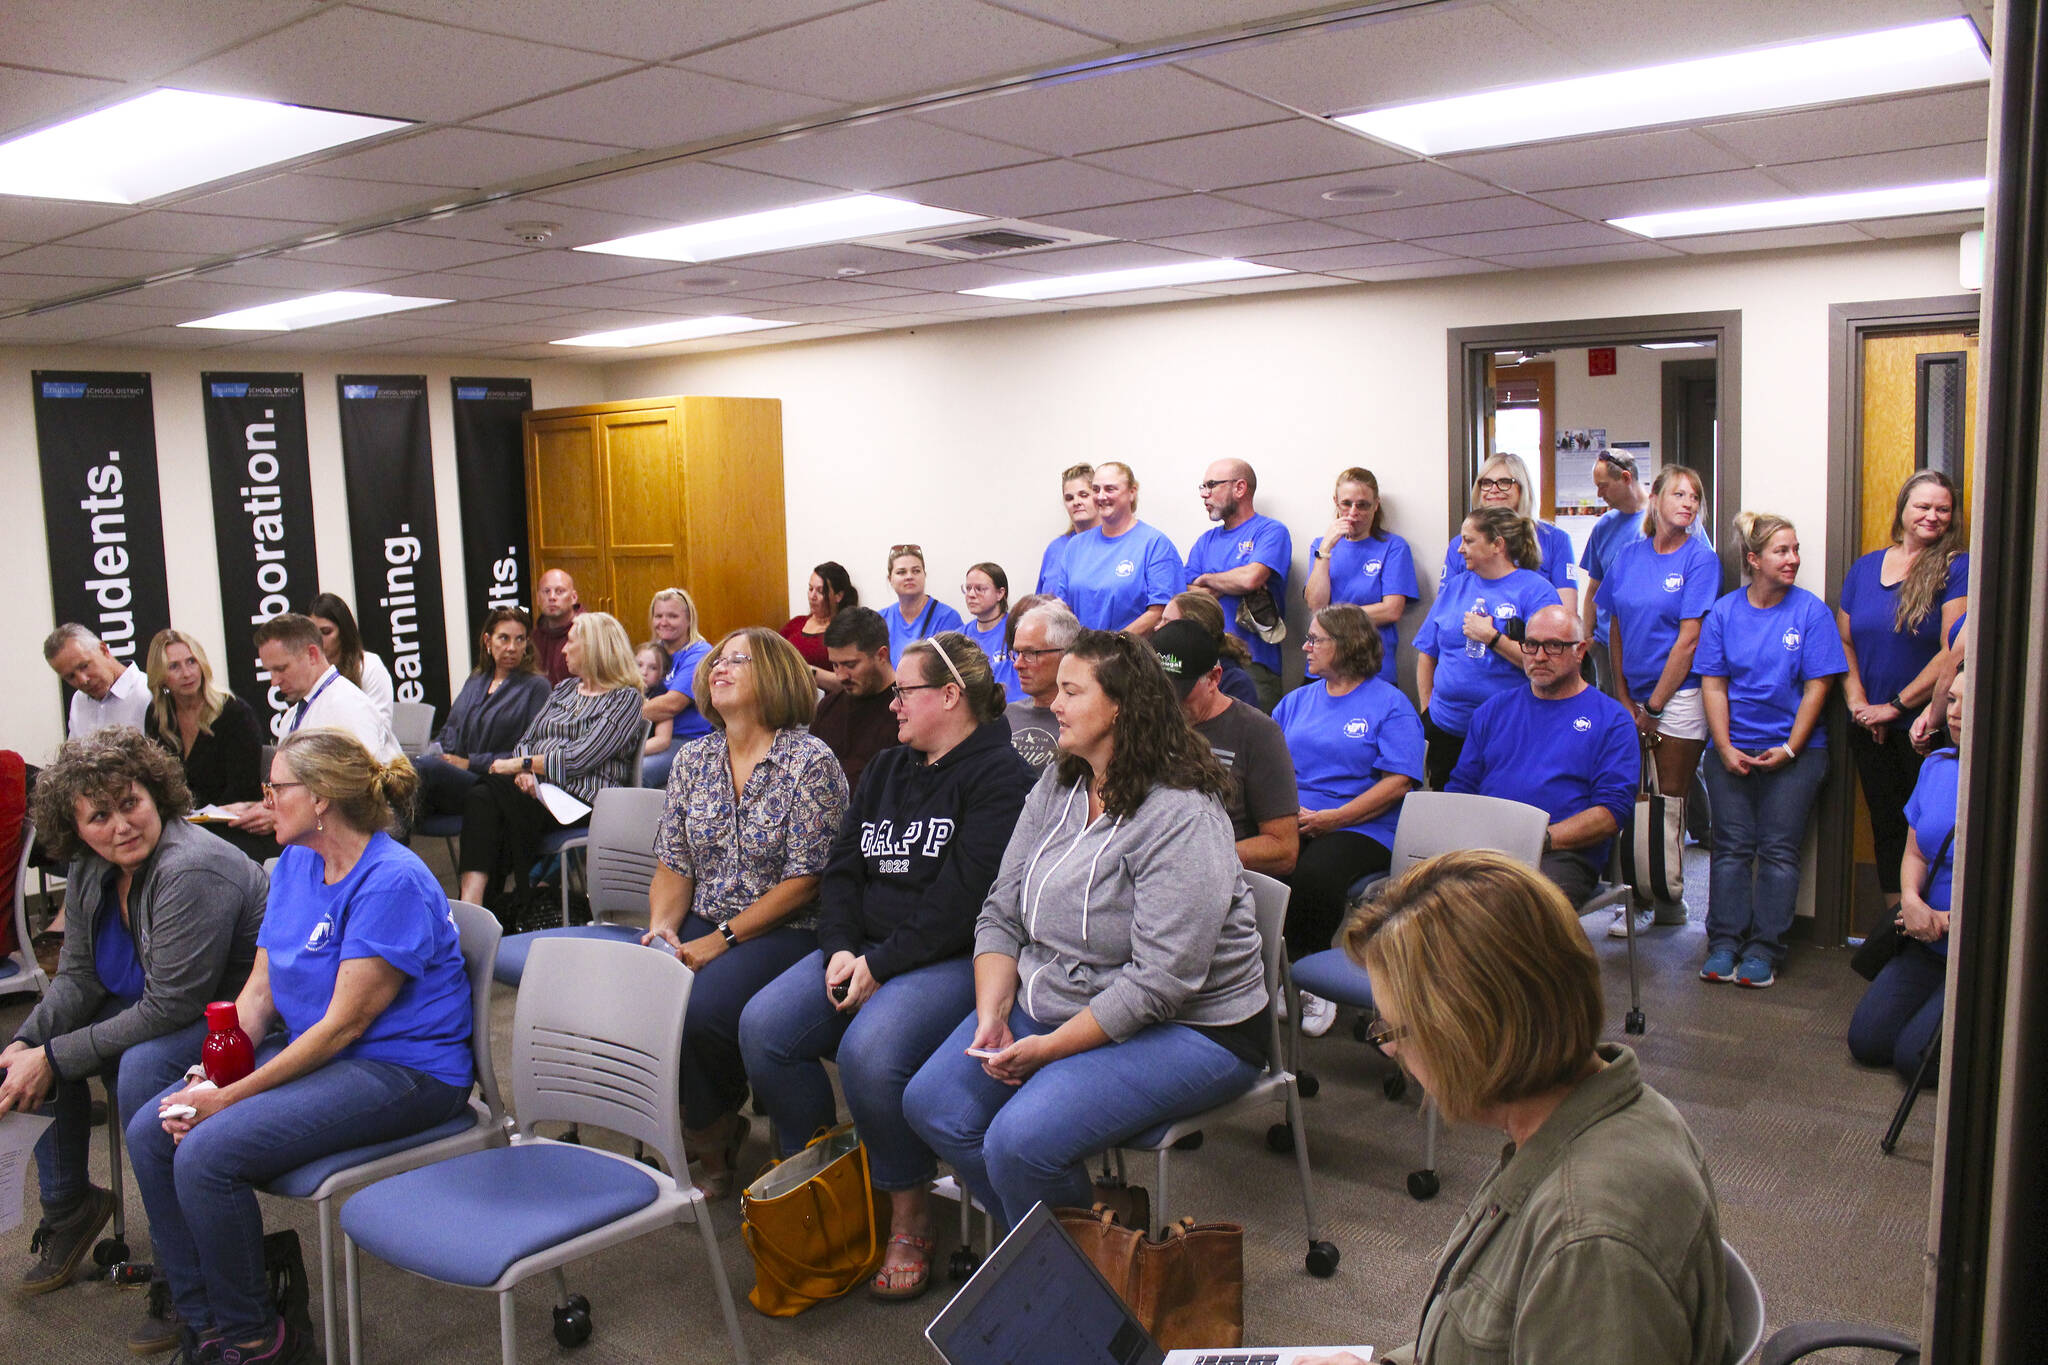 Photo by Ray Miller-Still 
Several members of PSE SEIU Enumclaw No. 703 attended the Sept. 19 Enumclaw School District Board meeting ahead of their contract vote on Friday.